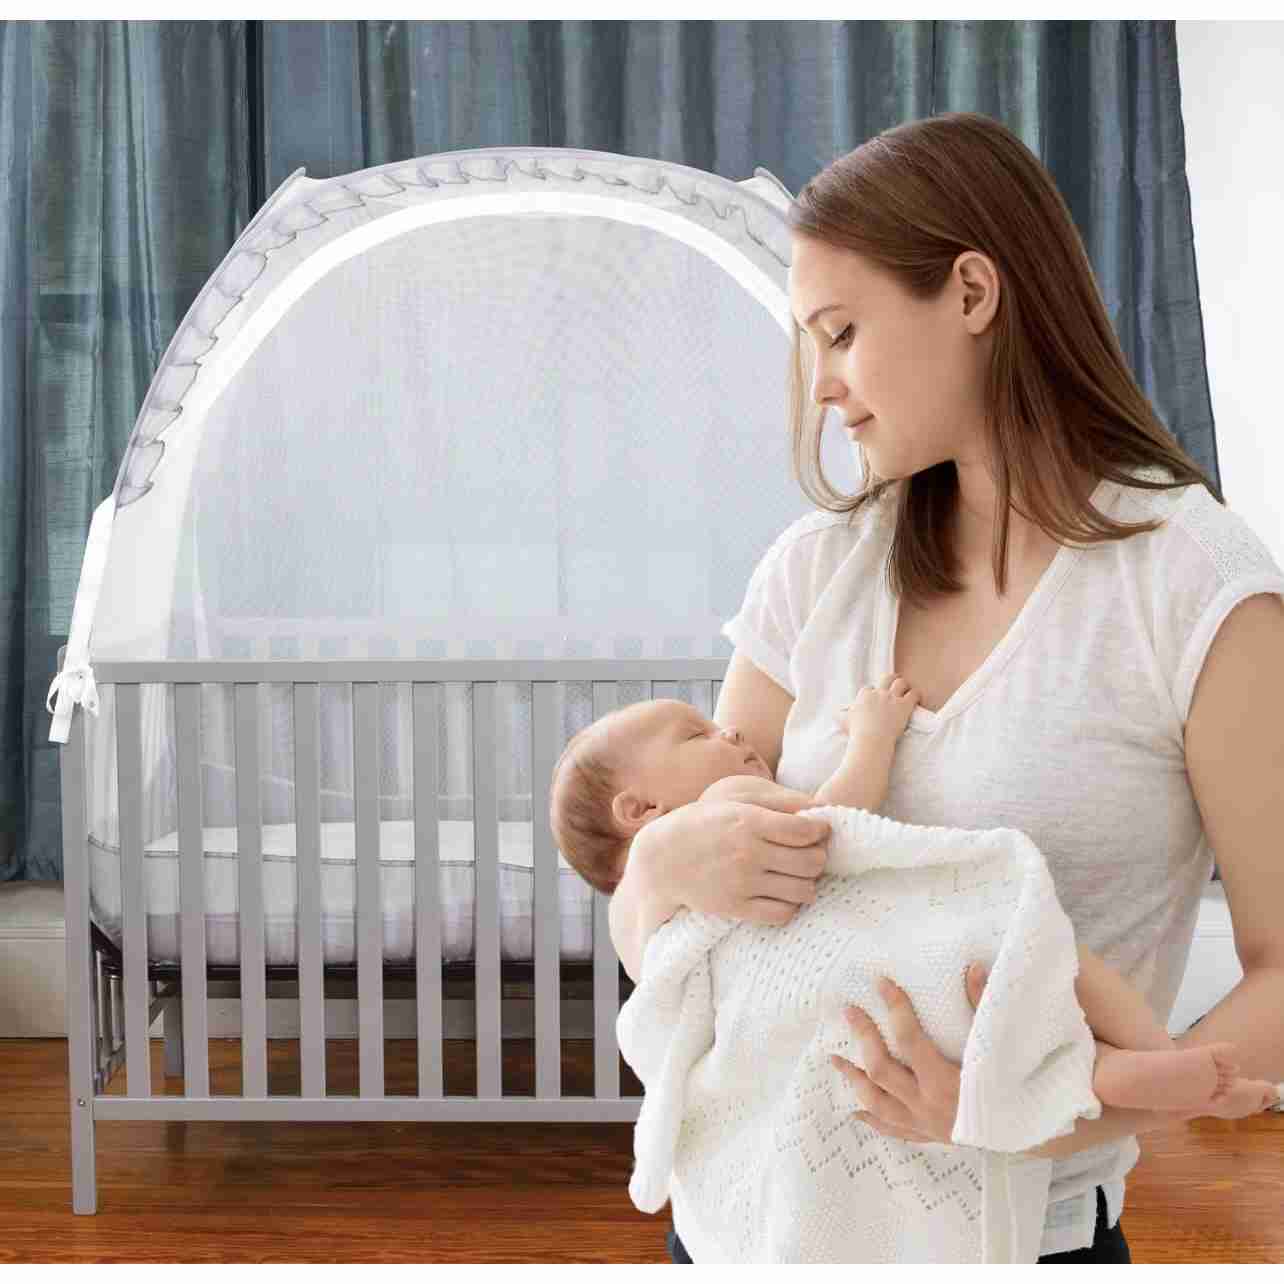 crib-net-to-keep-baby-in with cash back rebate